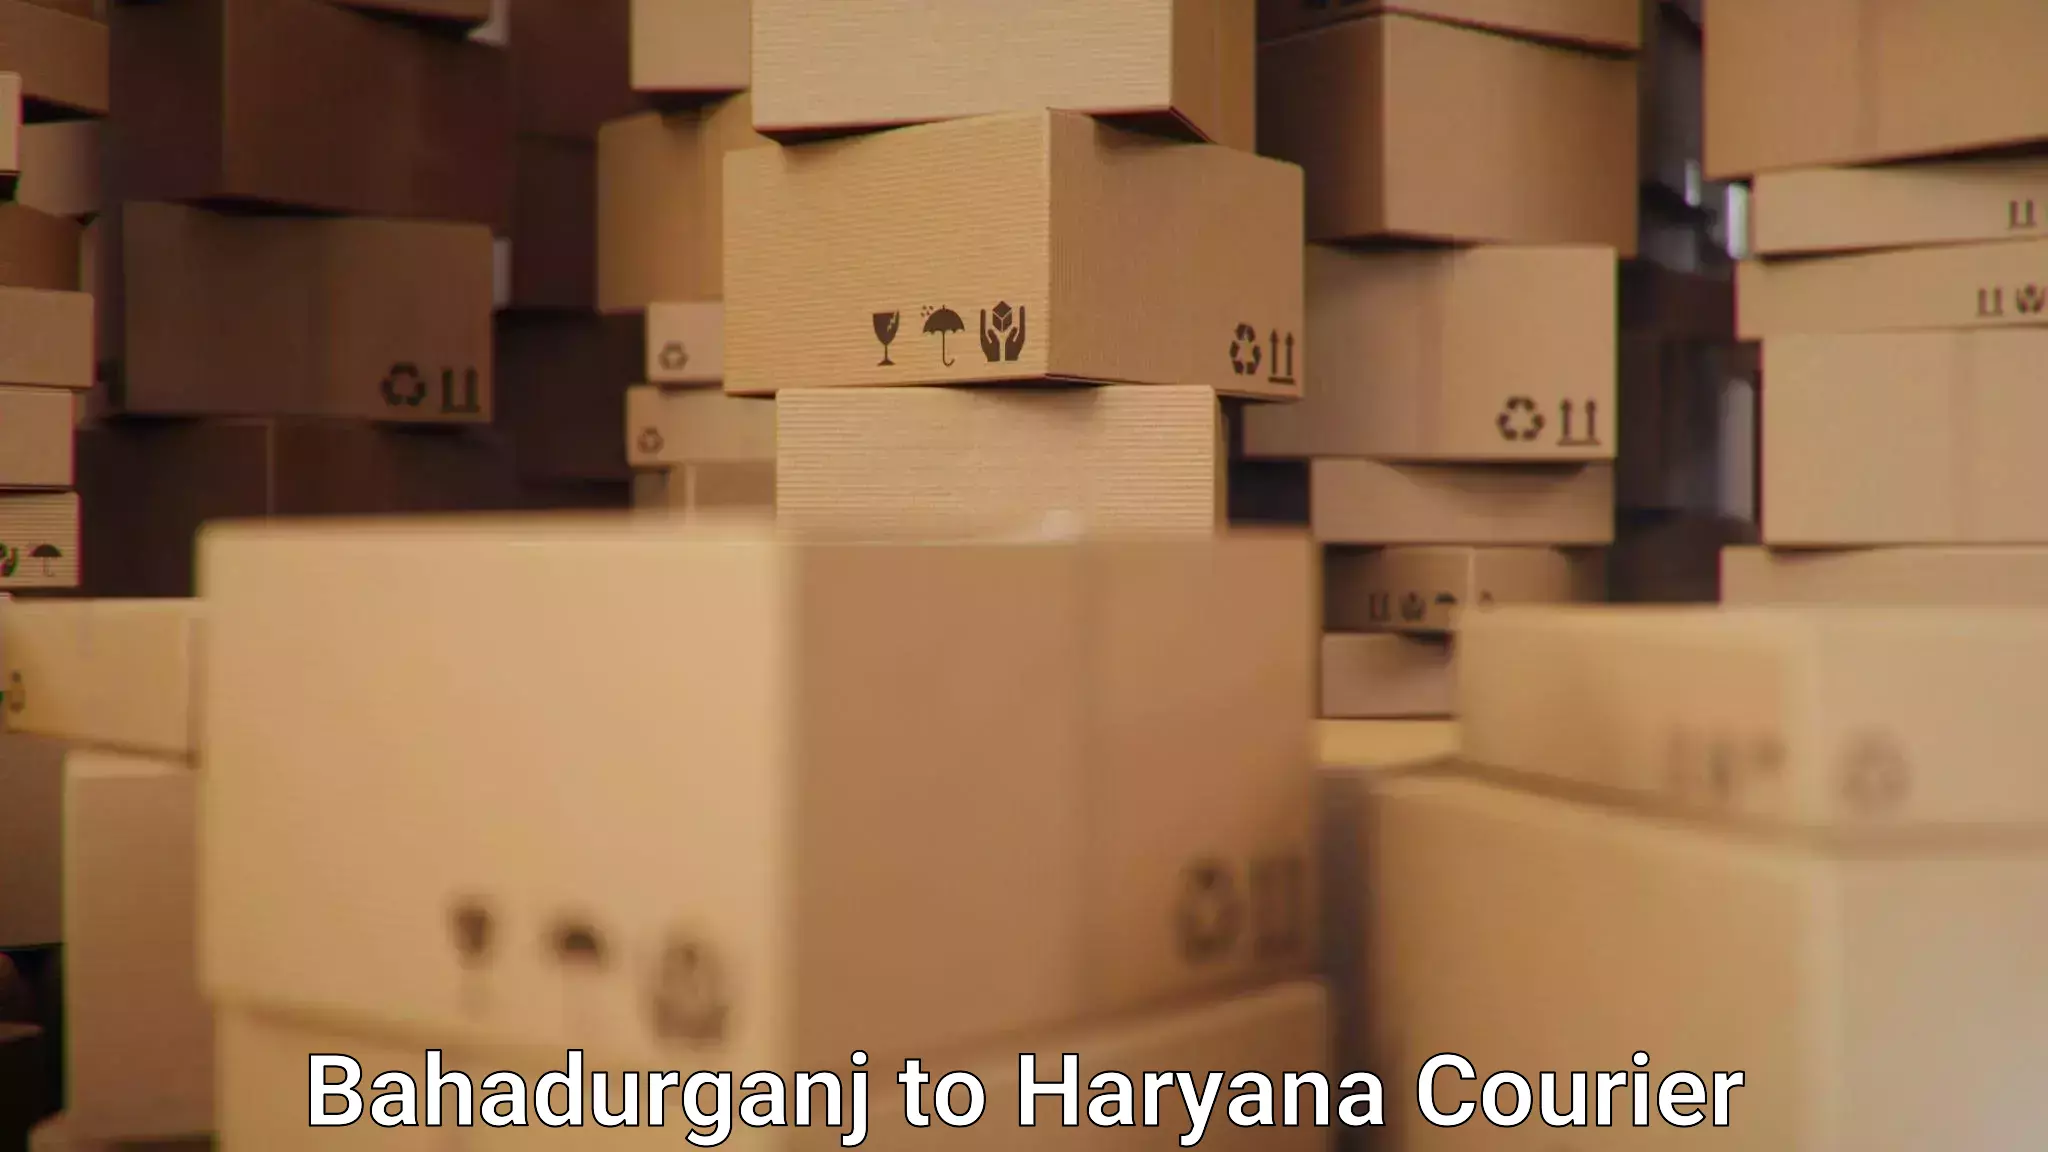 State-of-the-art courier technology Bahadurganj to Odhan